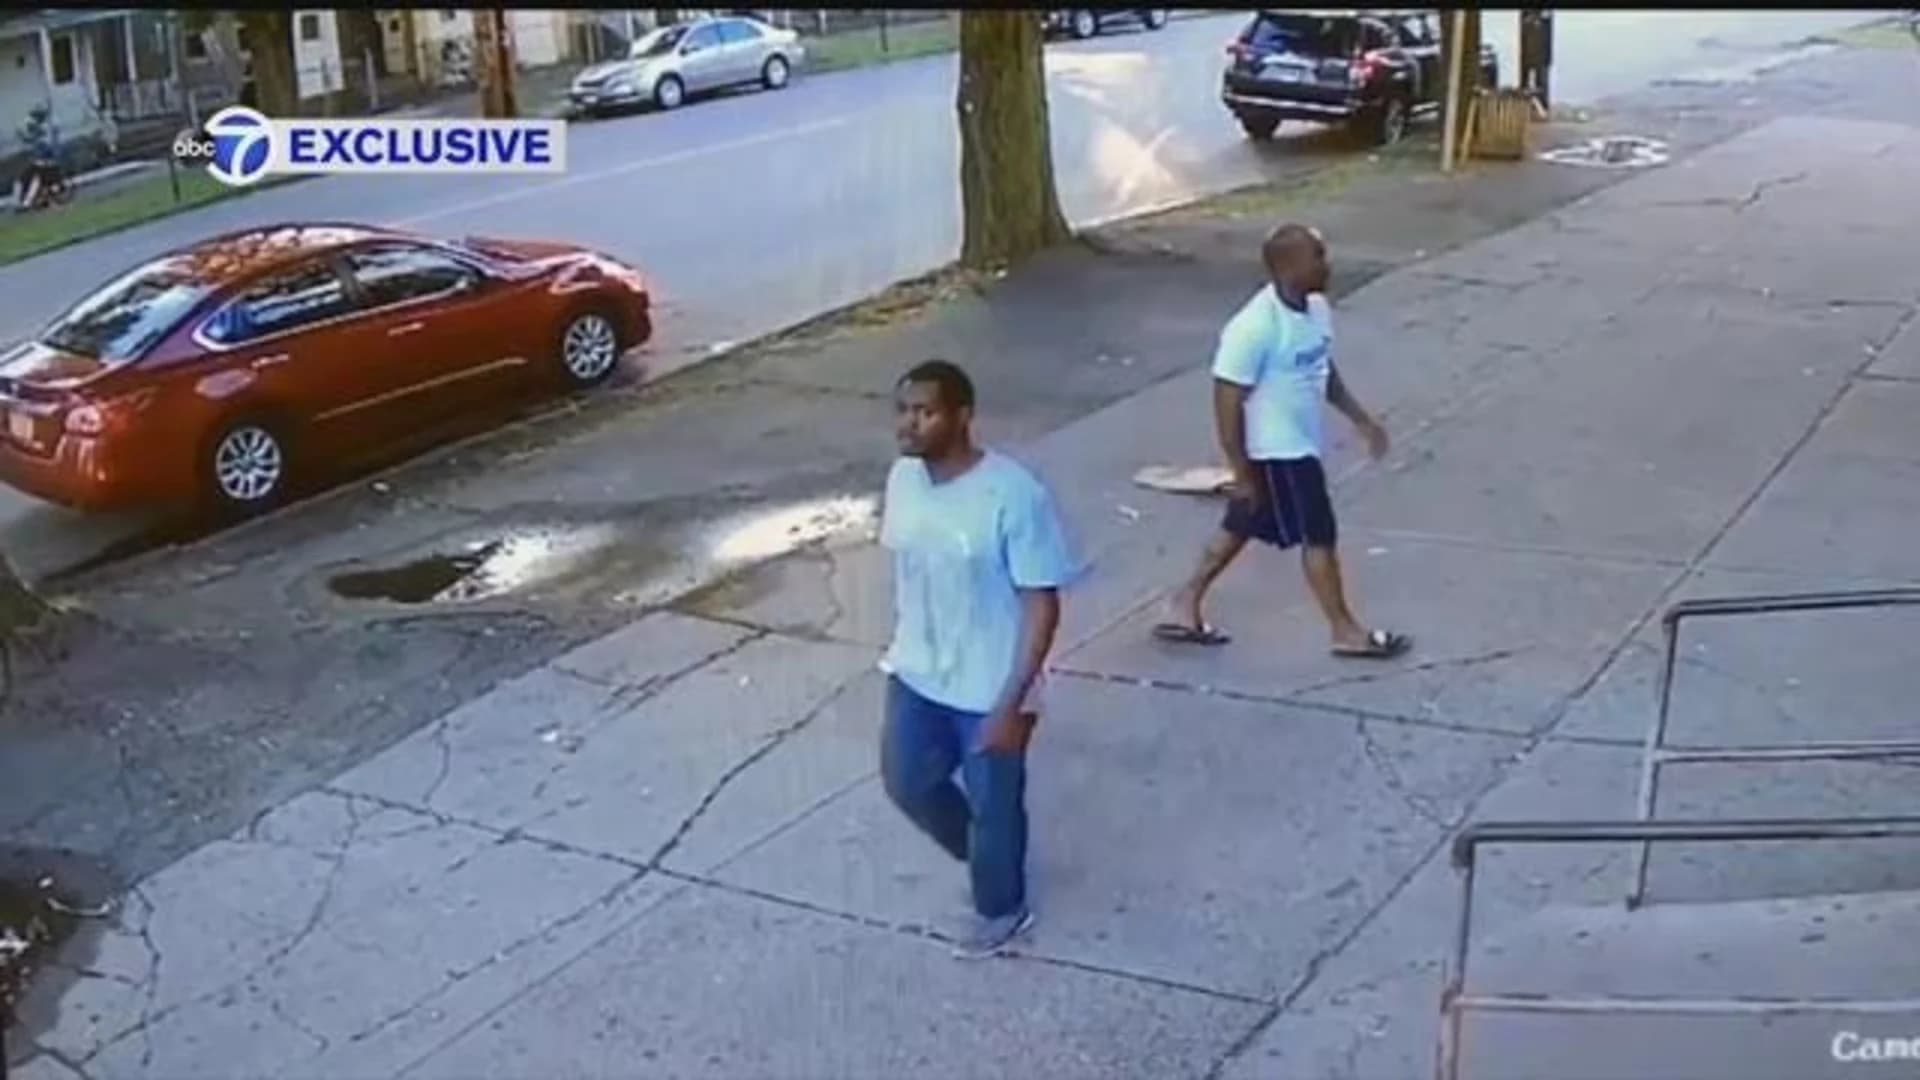 Video shows man stealing car with kid inside in Bridgeport